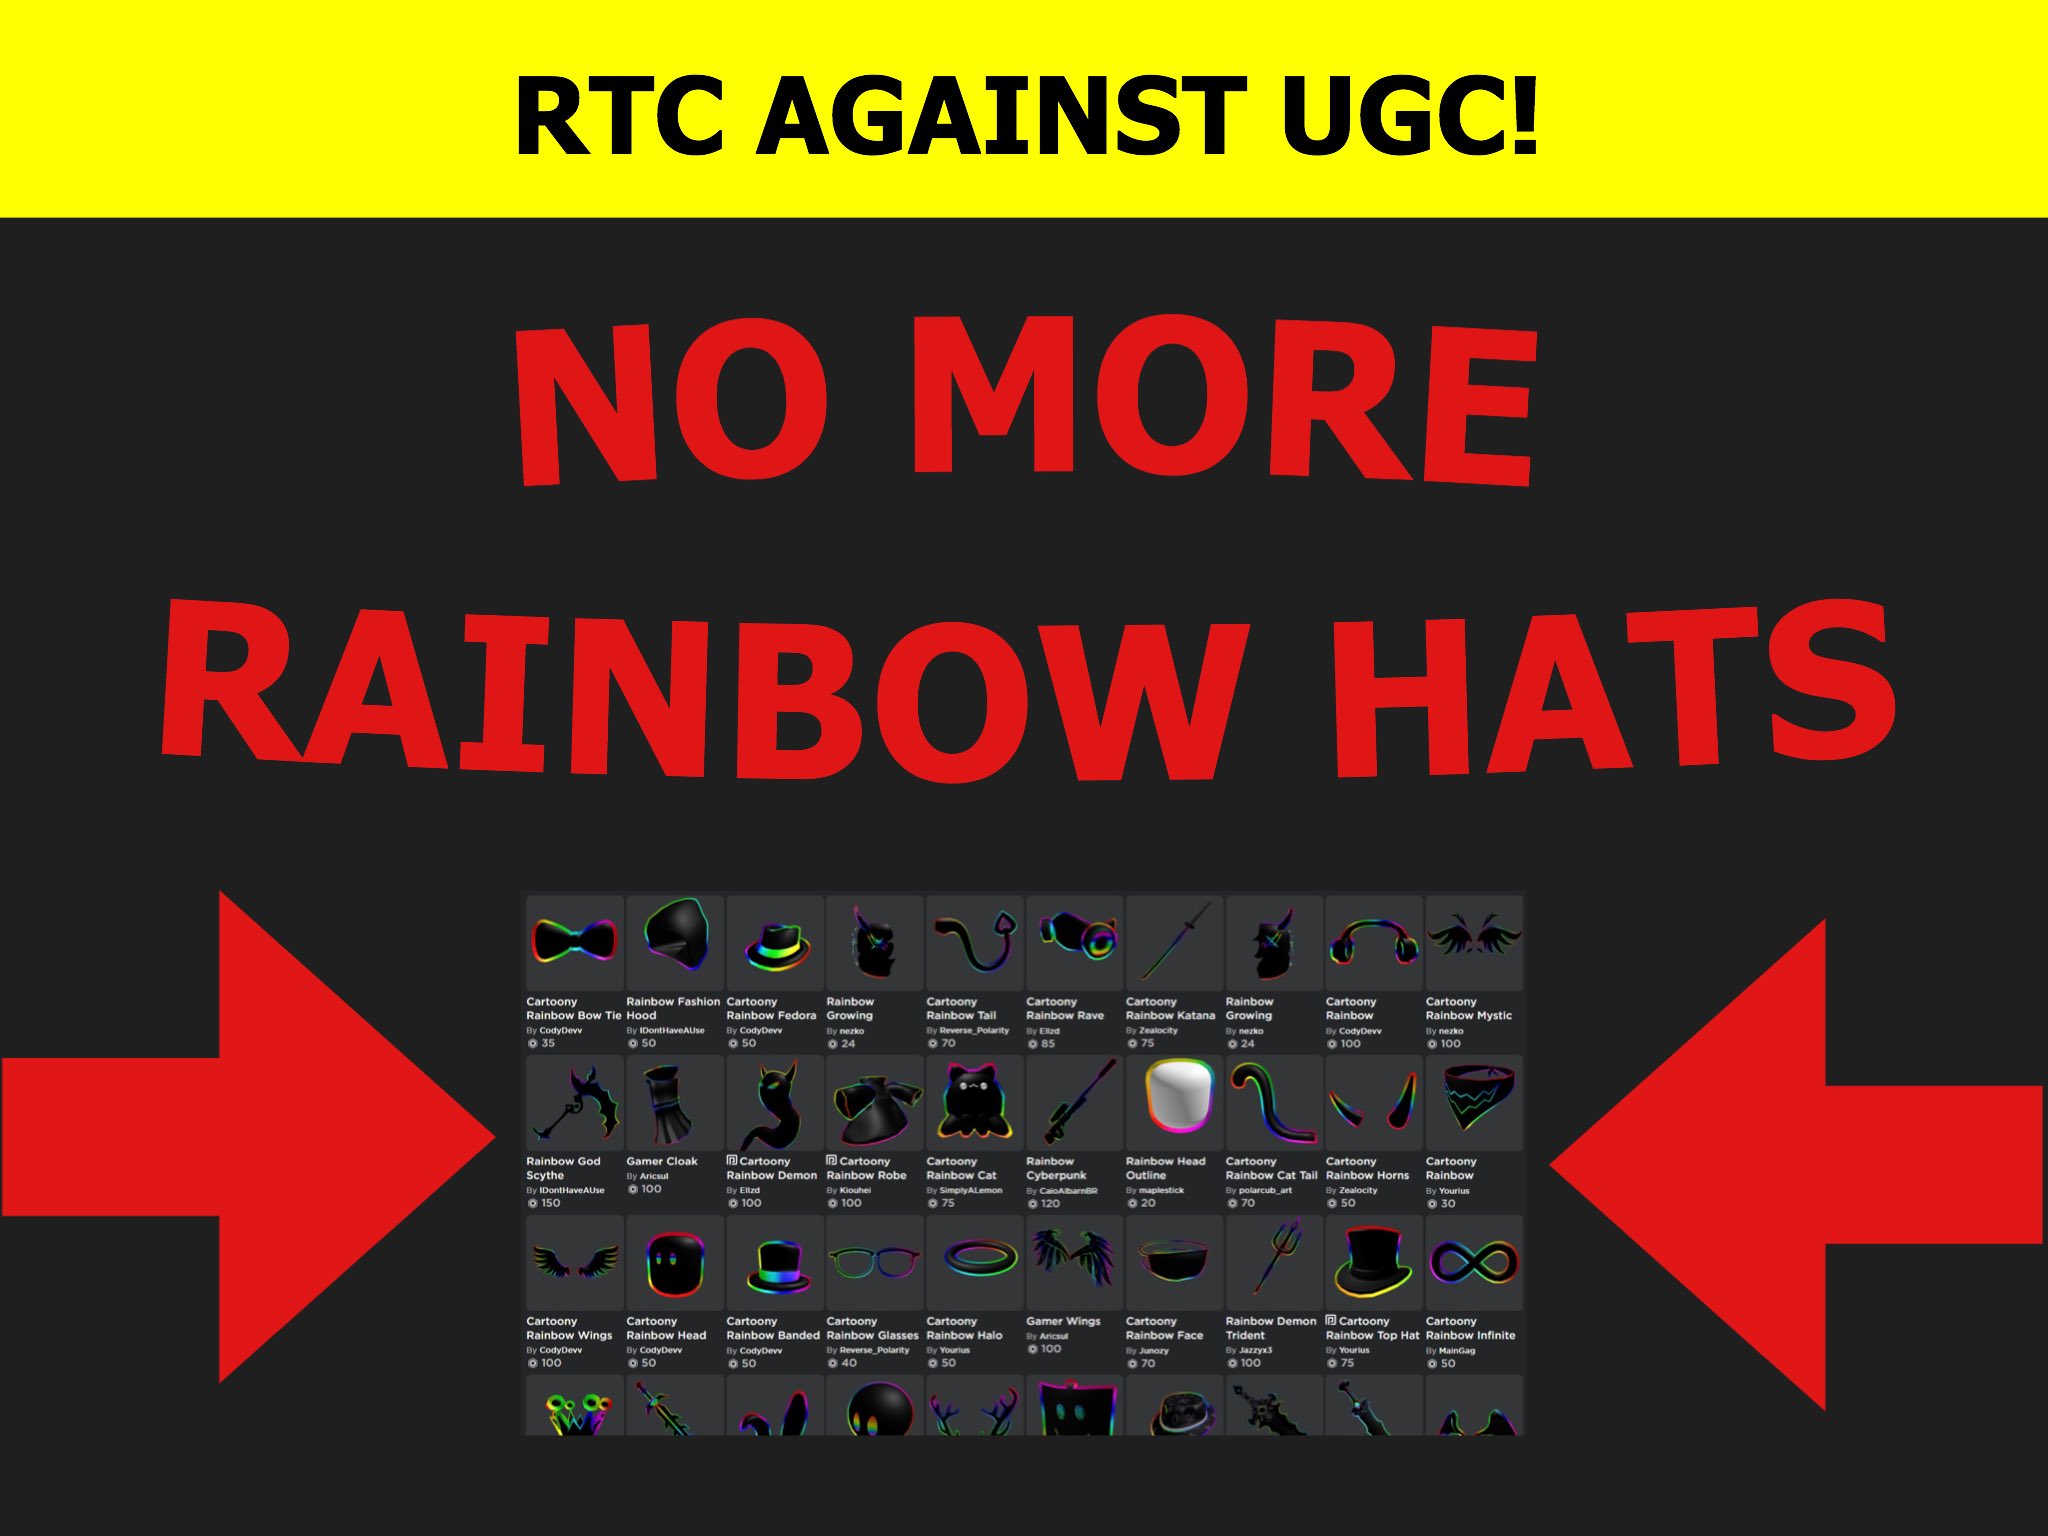 Roblox Attorney On Twitter Robloxattorney Roblox Robloxdev Robloxugc Rbx Rbxdev Should Roblox Allow Ugc Should Roblox Be Allowing New Rainbow User Generated Content Are Ugc Creators Taking Advantage Of The Pride Movement - tie on head roblox